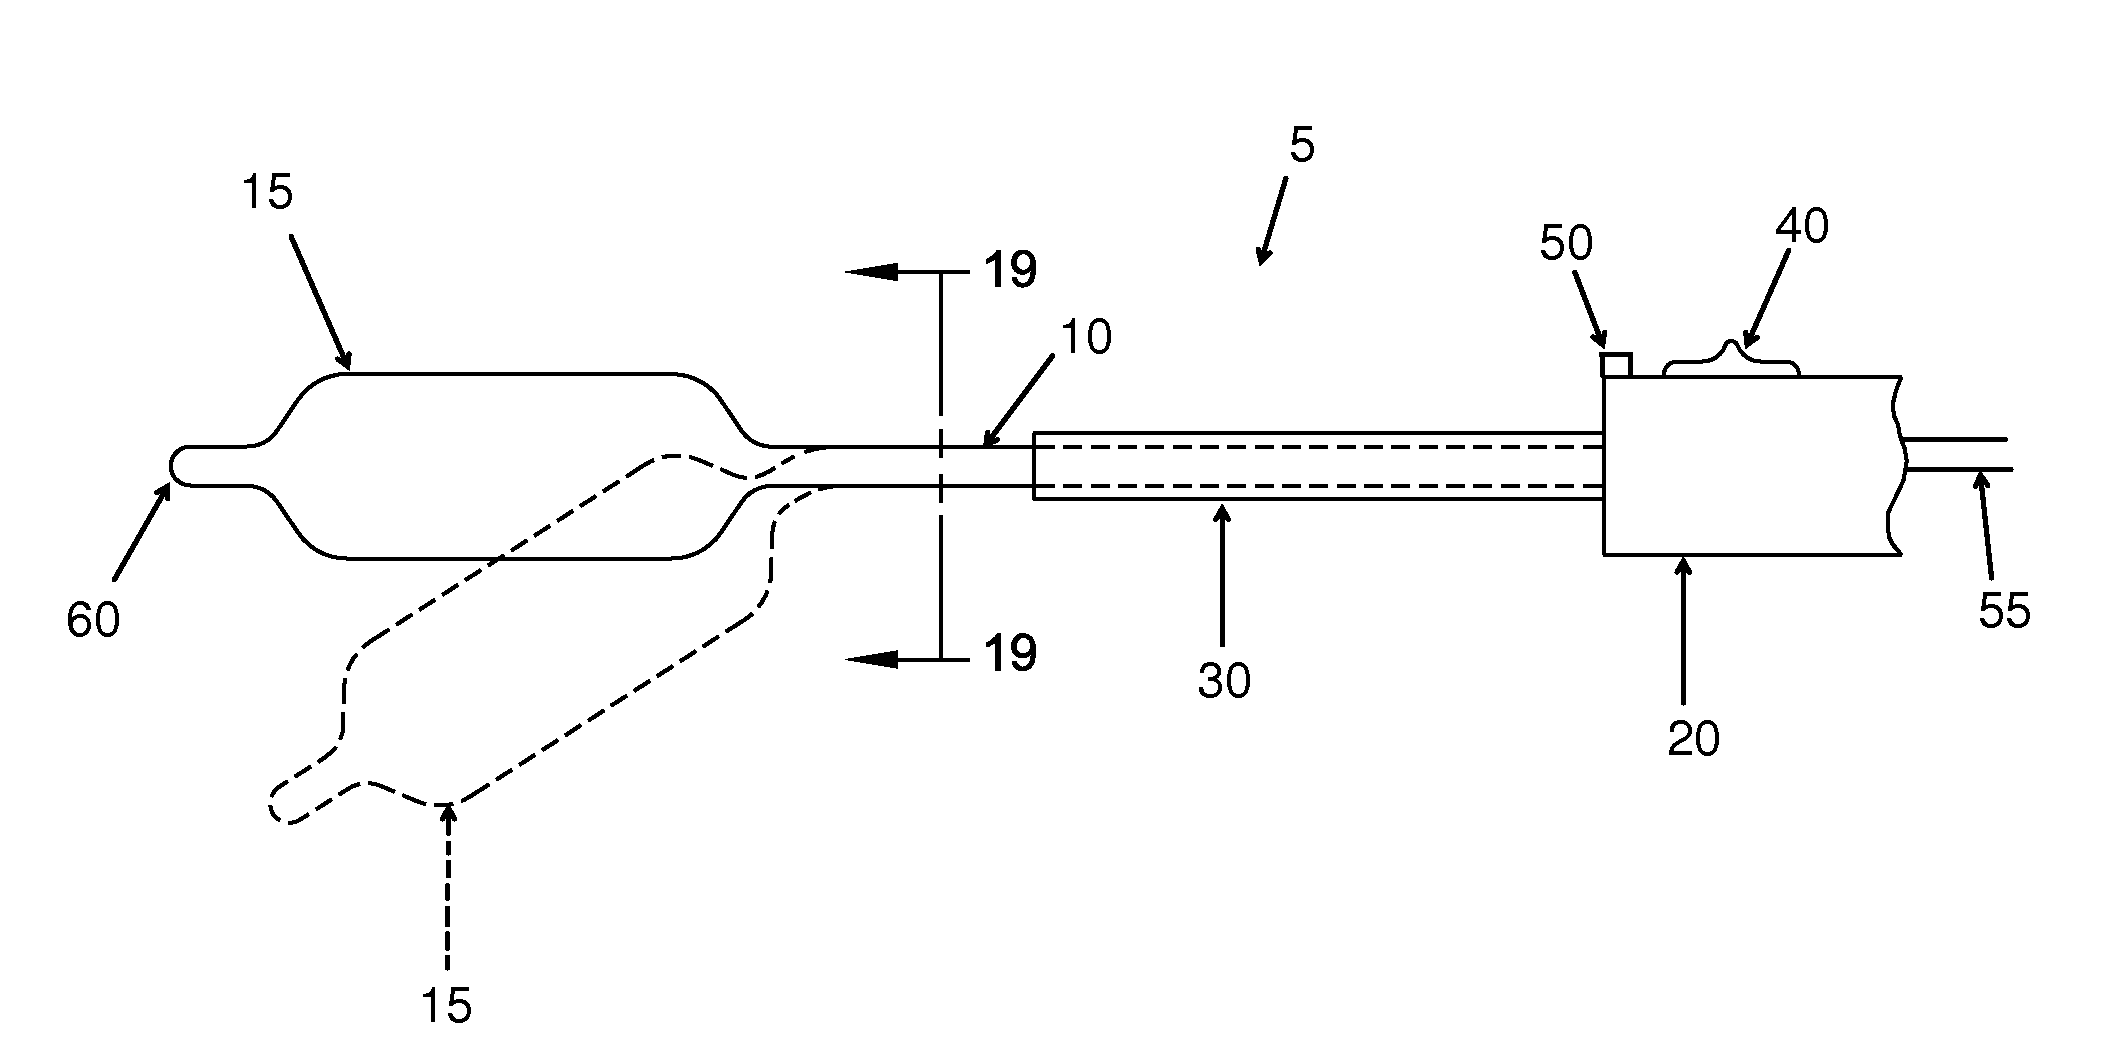 Method and apparatus for distracting a joint, including the provision and use of a novel joint-spacing balloon catheter and a novel inflatable perineal post